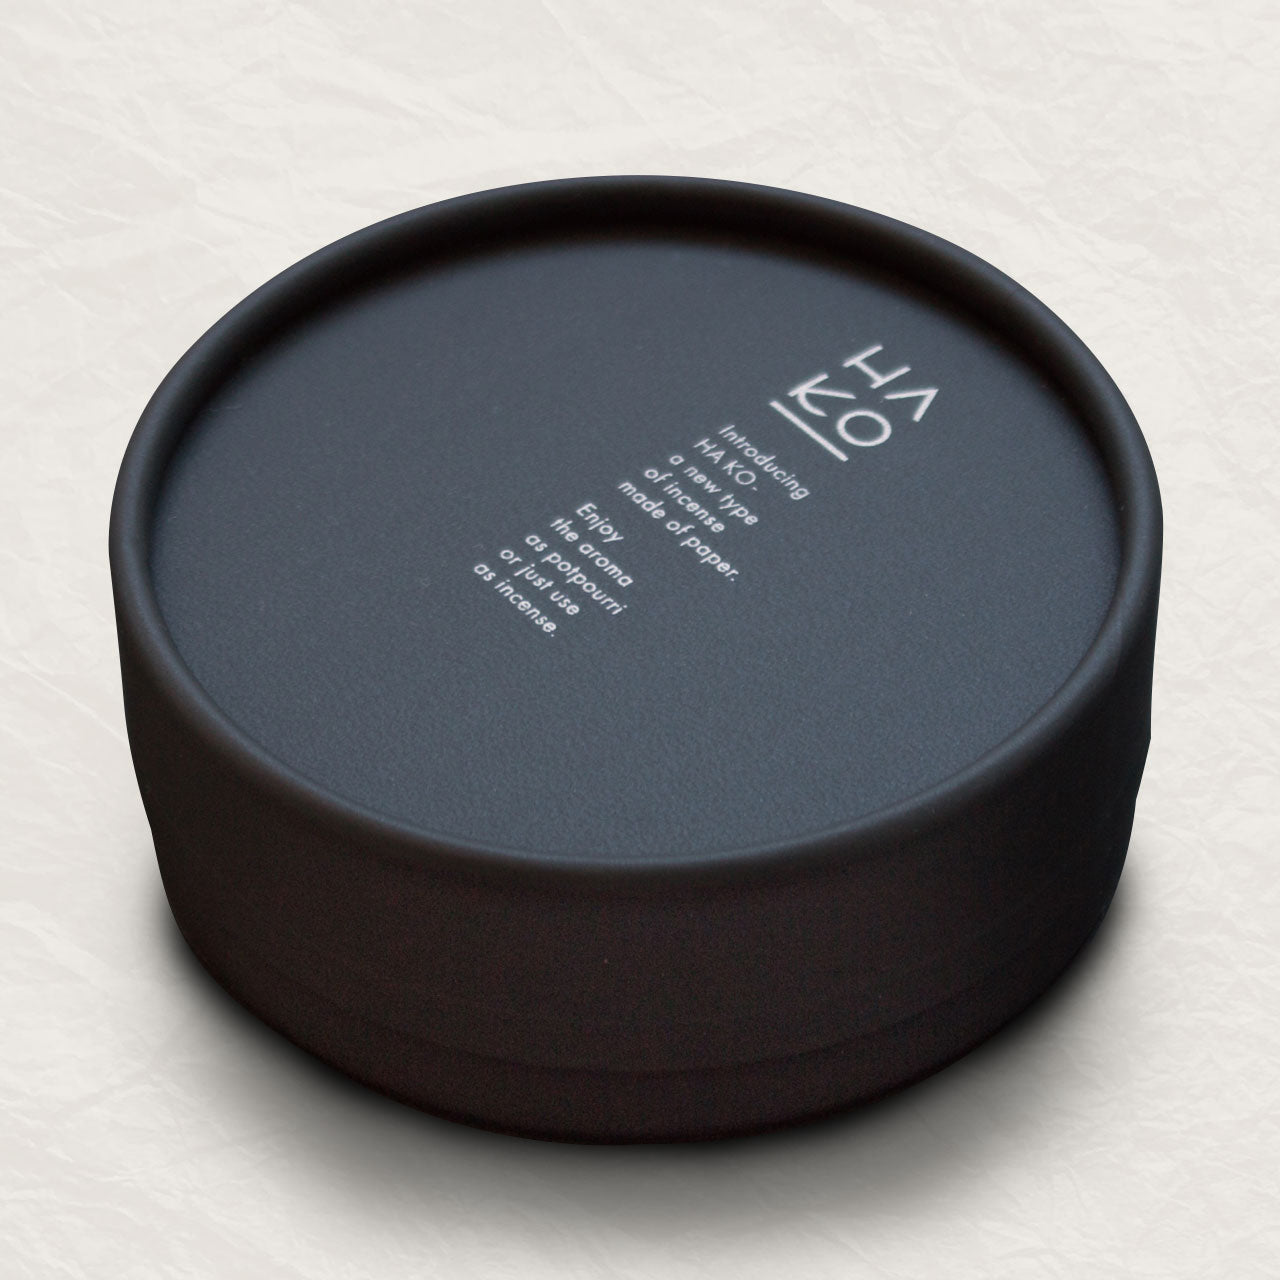 Black circular container with white lettering describing the incense inside